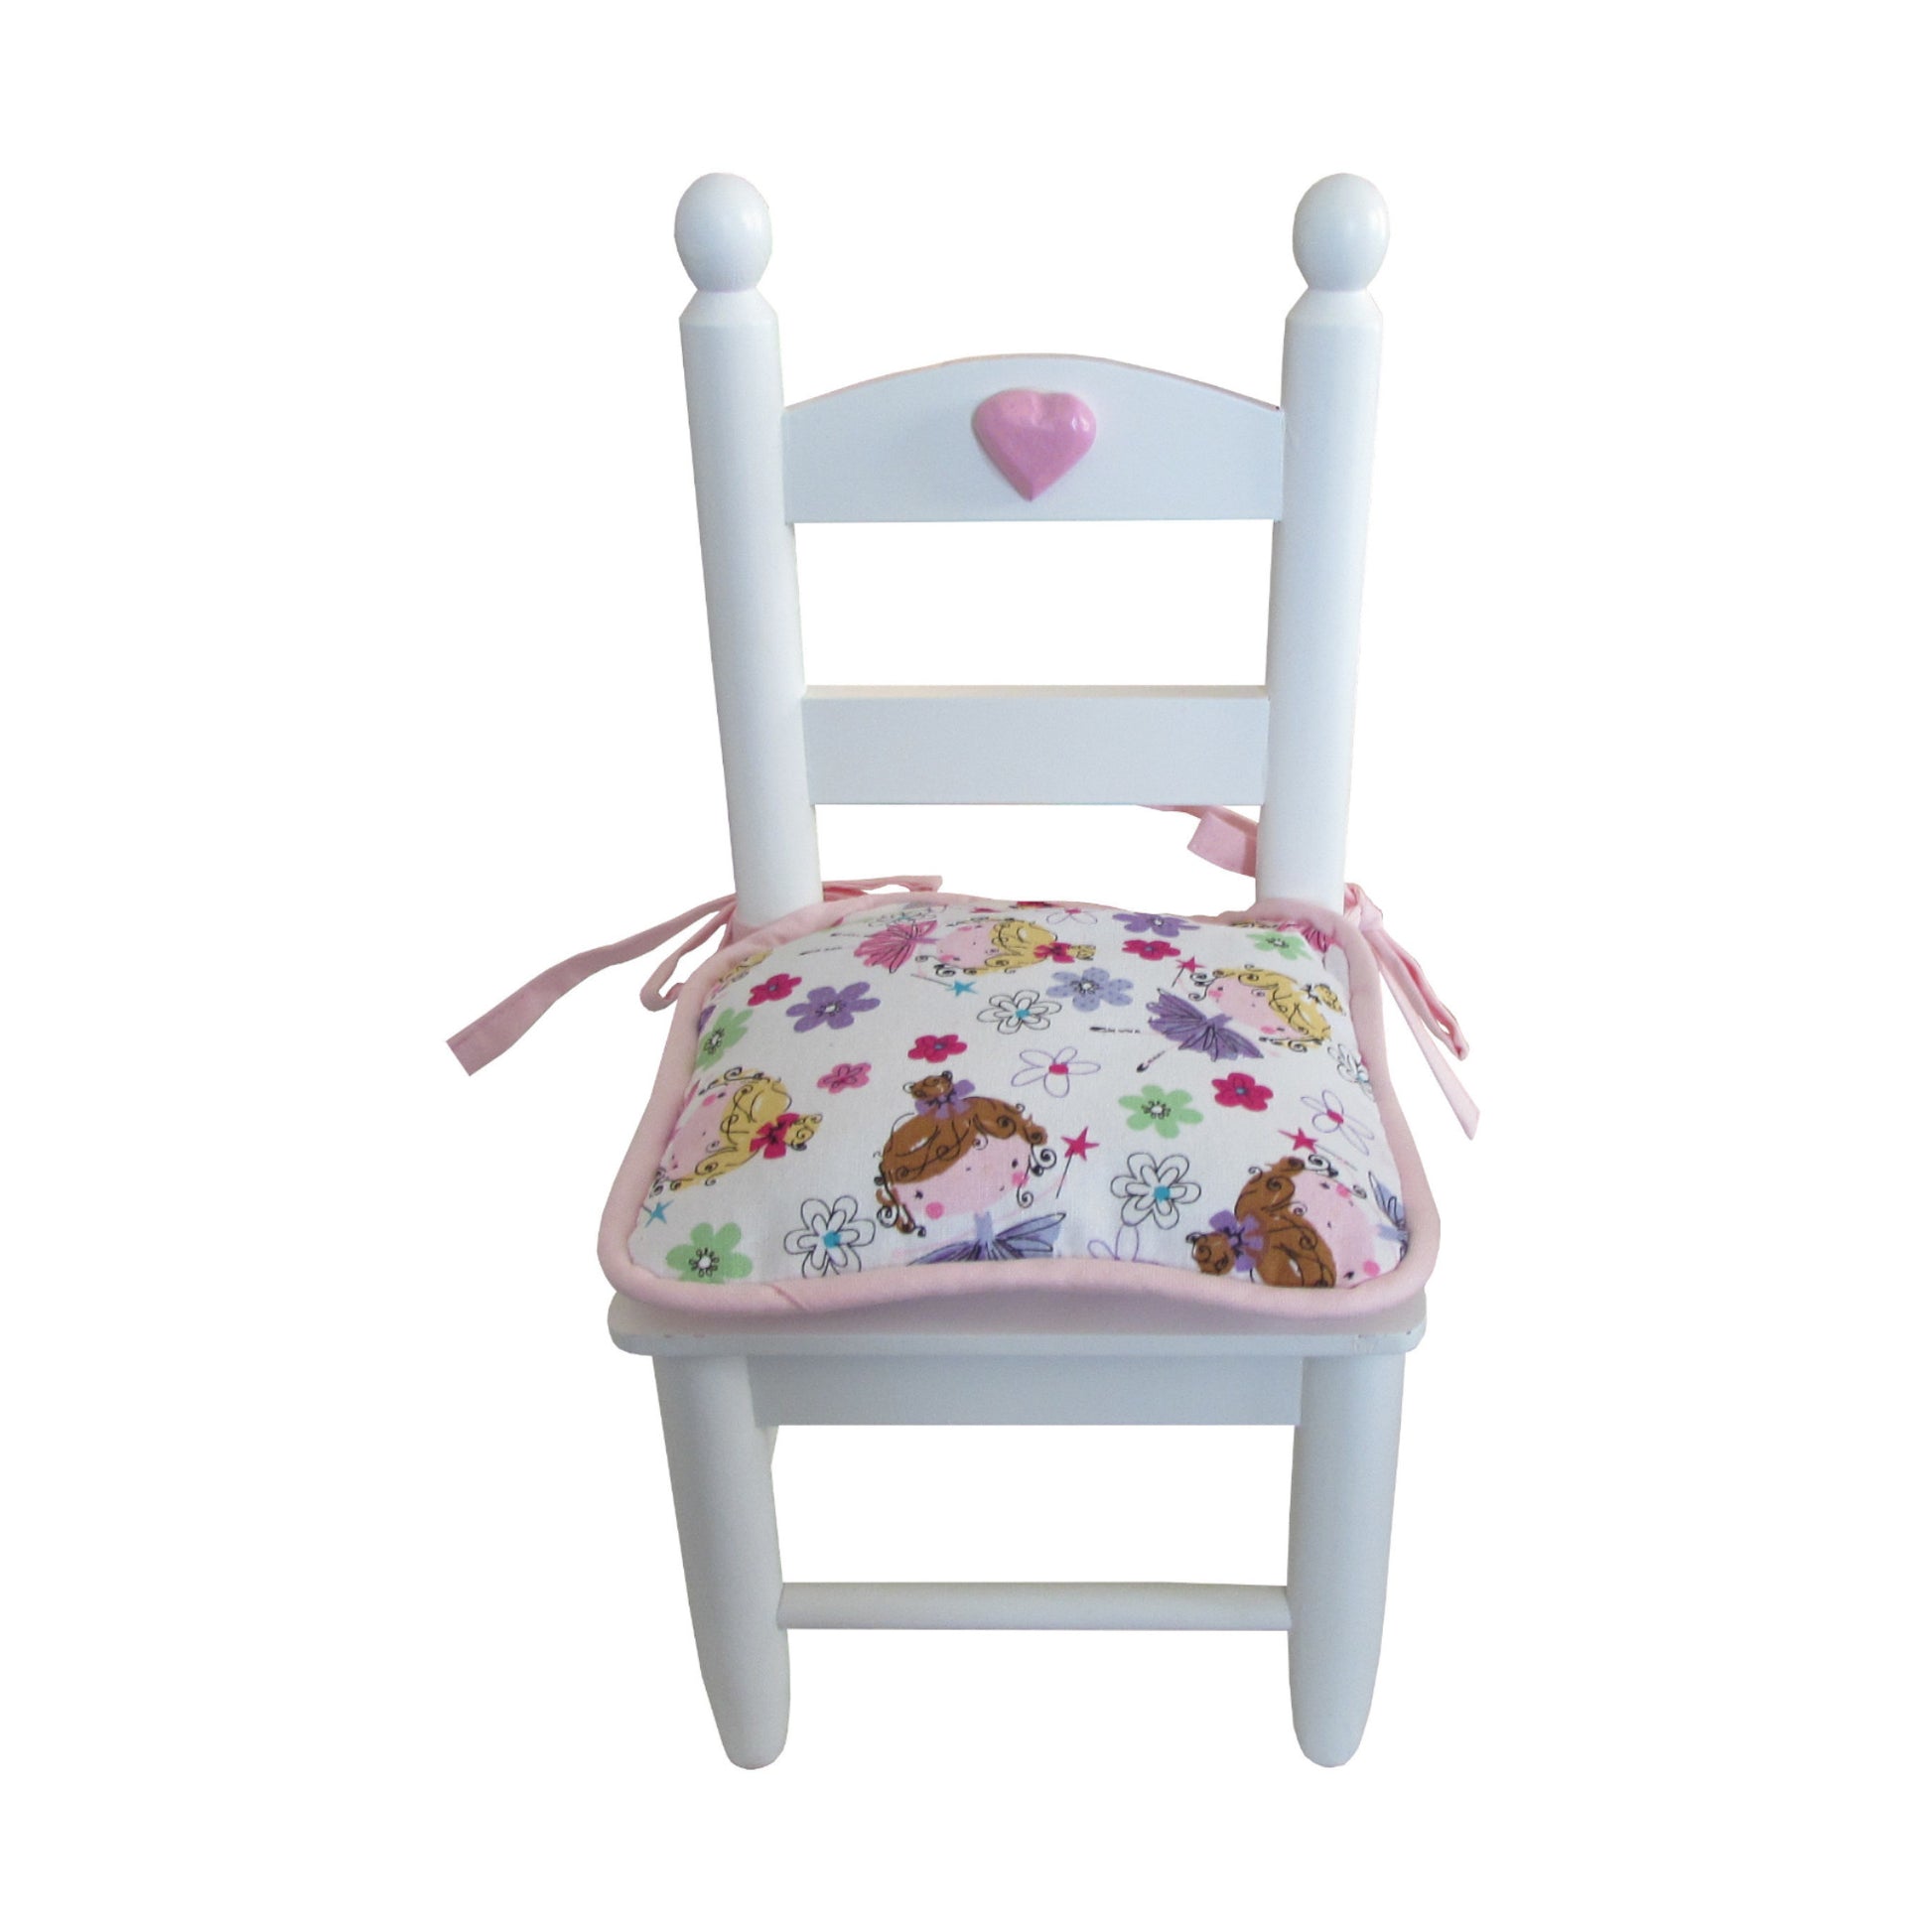 Ballerina and Flowers Print Doll Chair Cushion for 18-inch dolls